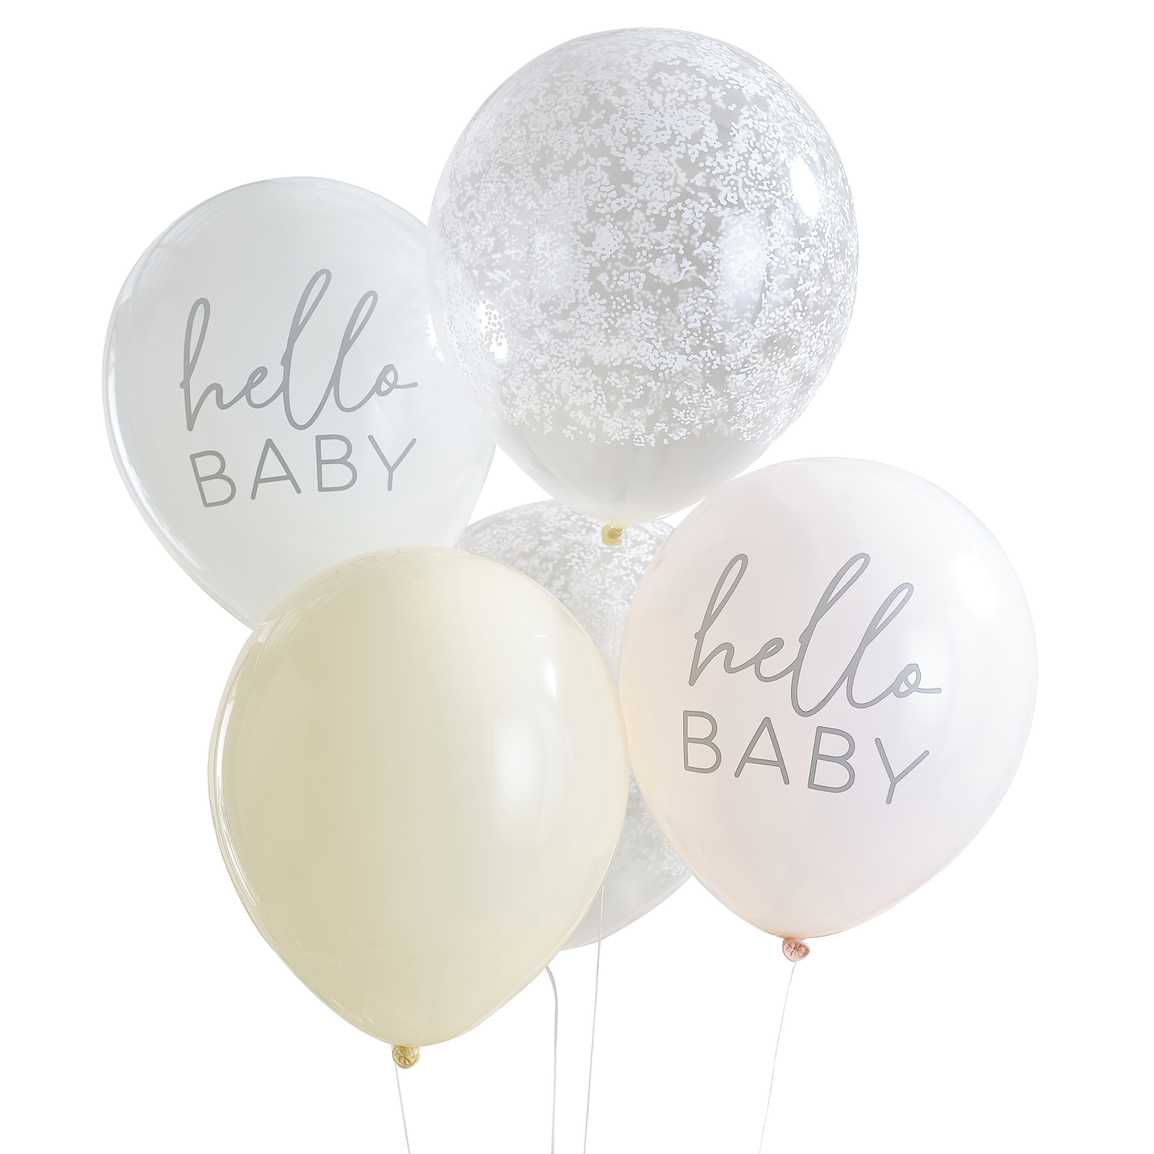 Baloni Ginger Ray - Hello Baby Floral Baby Shower